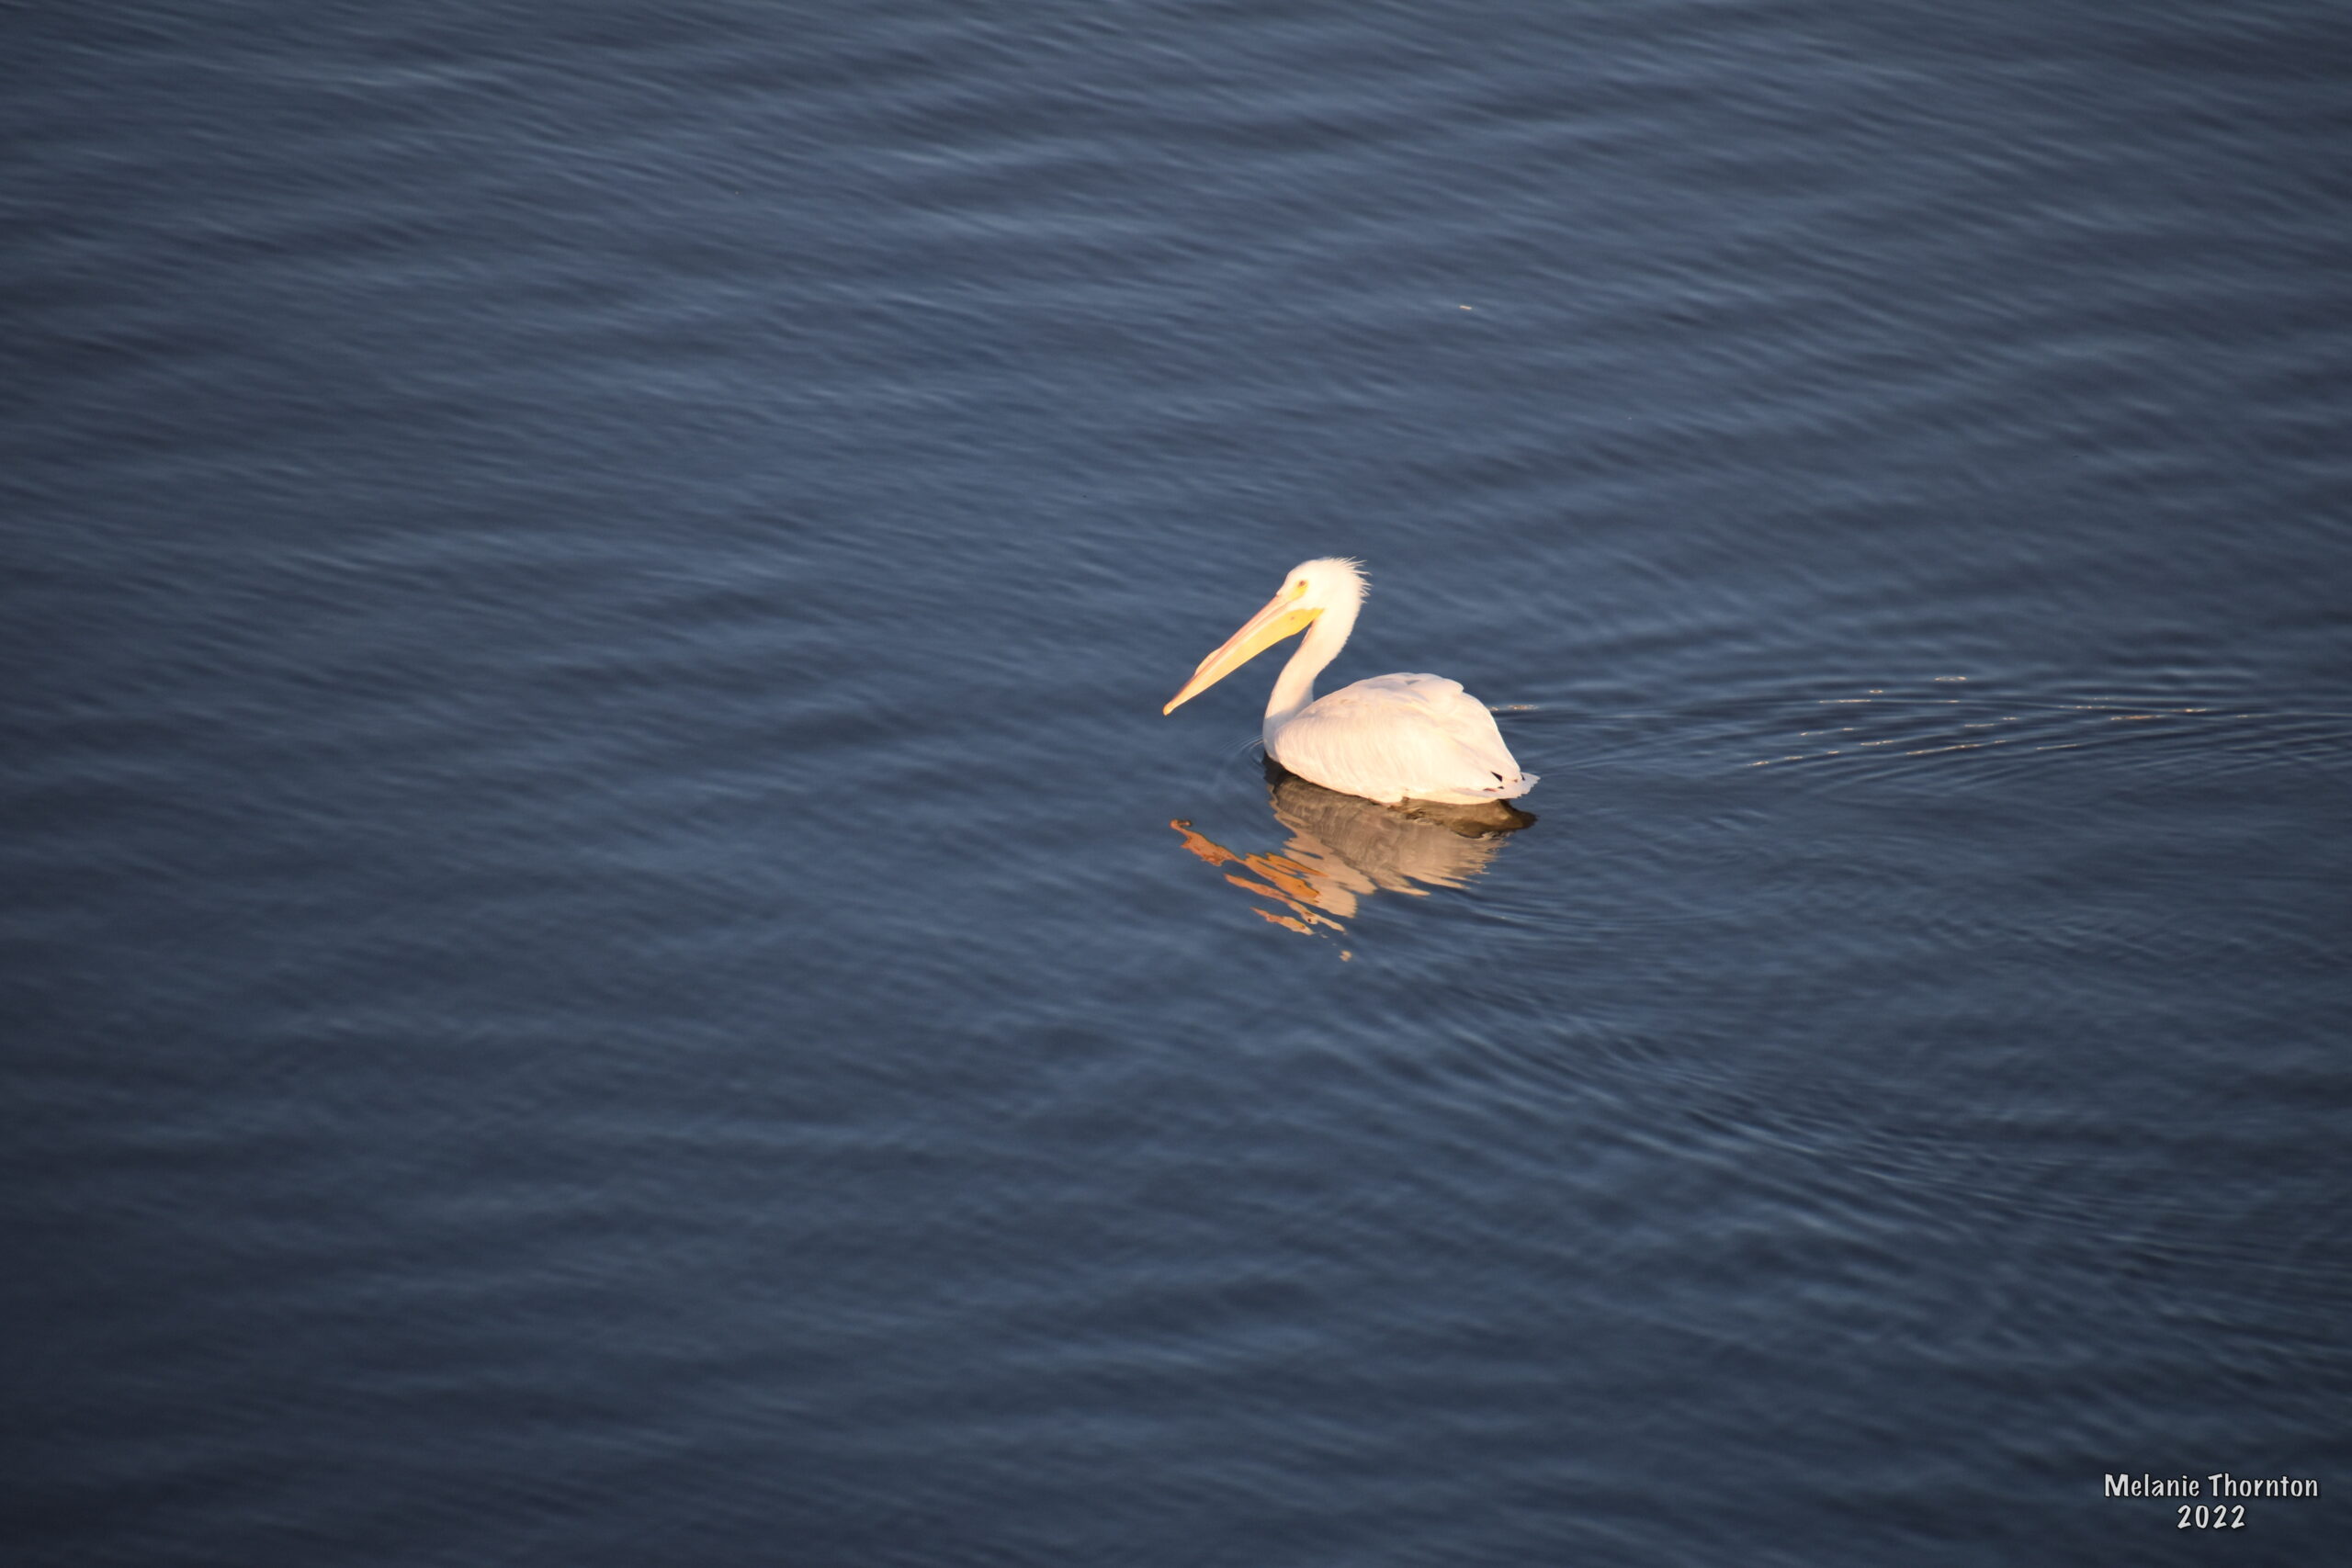 A large white bird with a long yellow beak floats on the water, its reflection below it